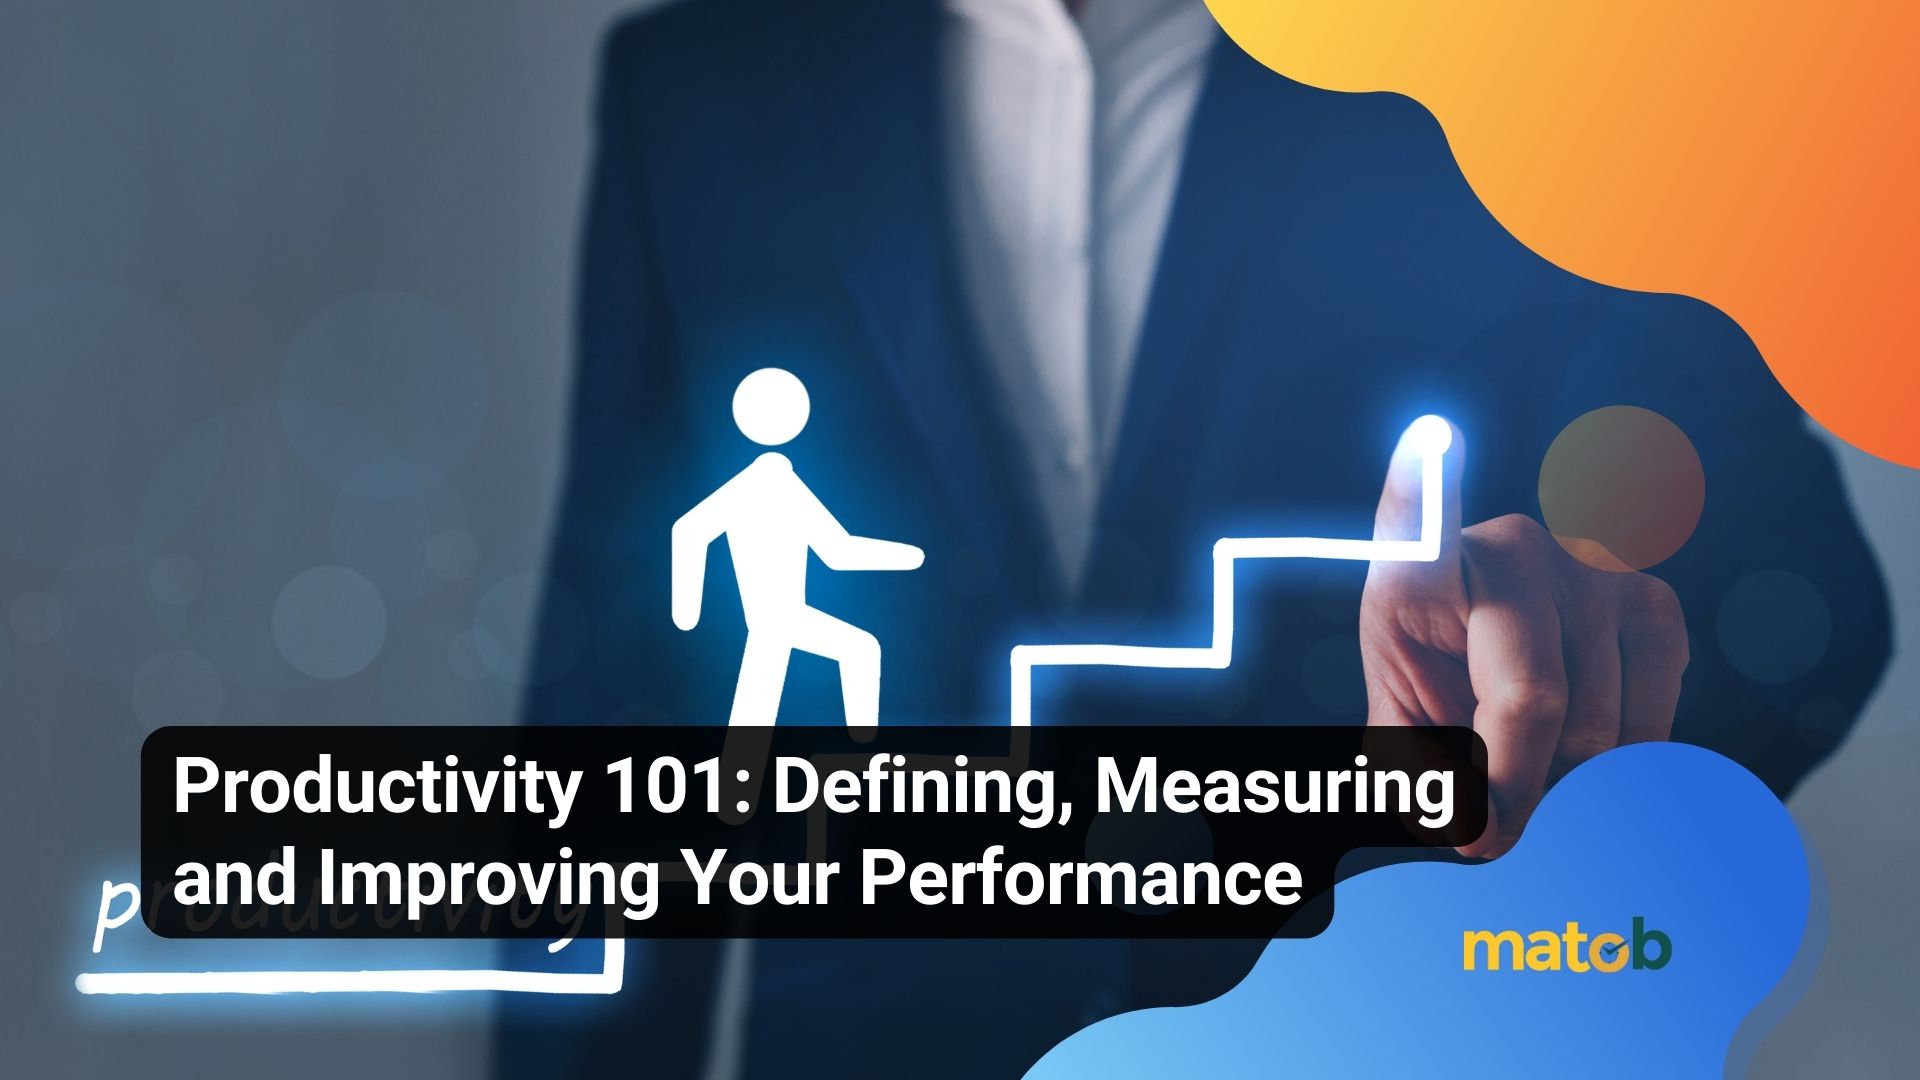 Productivity 101: Defining, Measuring and Improving Your Performance